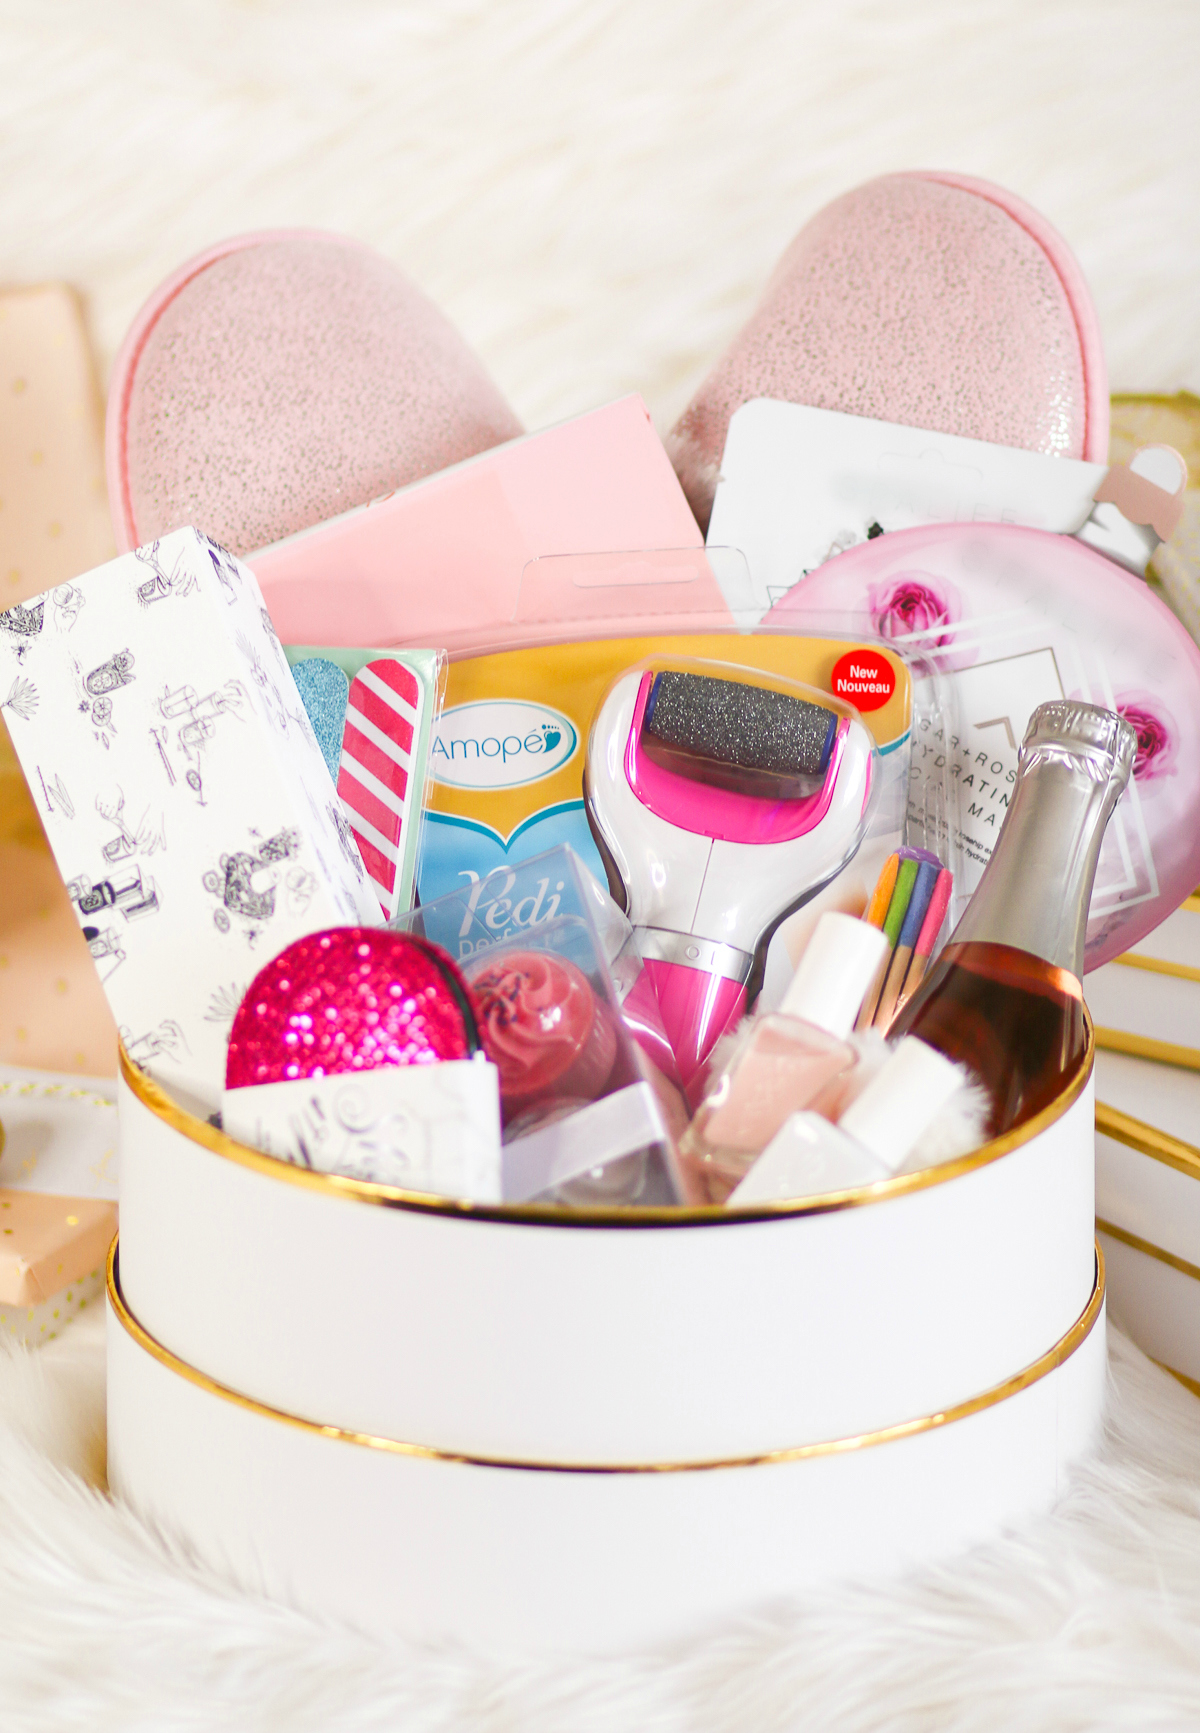 DIY spa gift basket consisting of 12 self care gift ideas she's guaranteed to love, including the Amope Pedi Perfect Foot File, by southern blogger Stephanie Ziajka from Diary of a Debutante